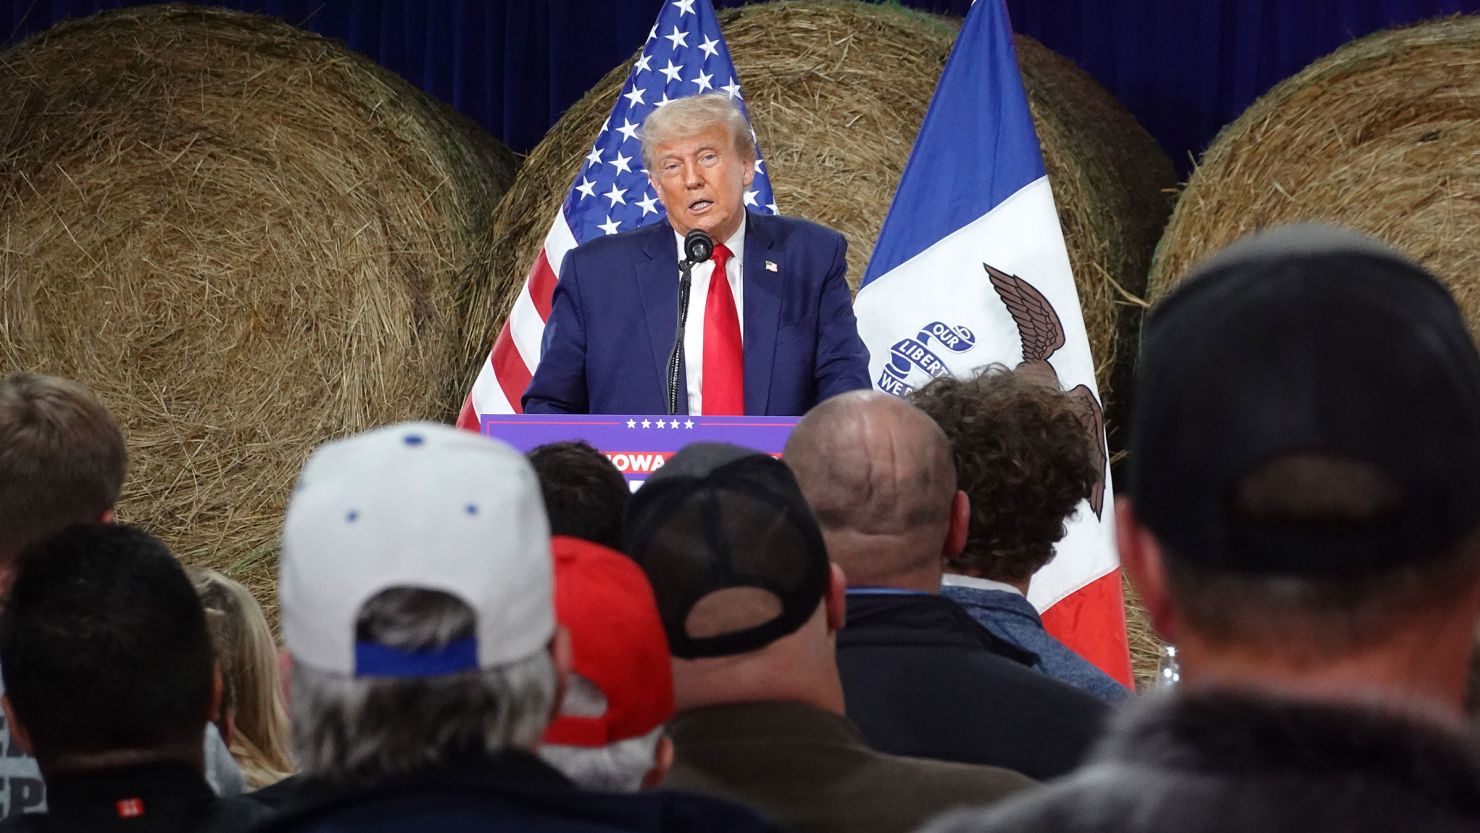 Republican presidential candidate former President Donald Trump speaks to guests during a campaign event at the Dallas County Fairgrounds on October 16, 2023 in Adel, Iowa. Trump also spoke at a rally in Clive, Iowa, the same afternoon.